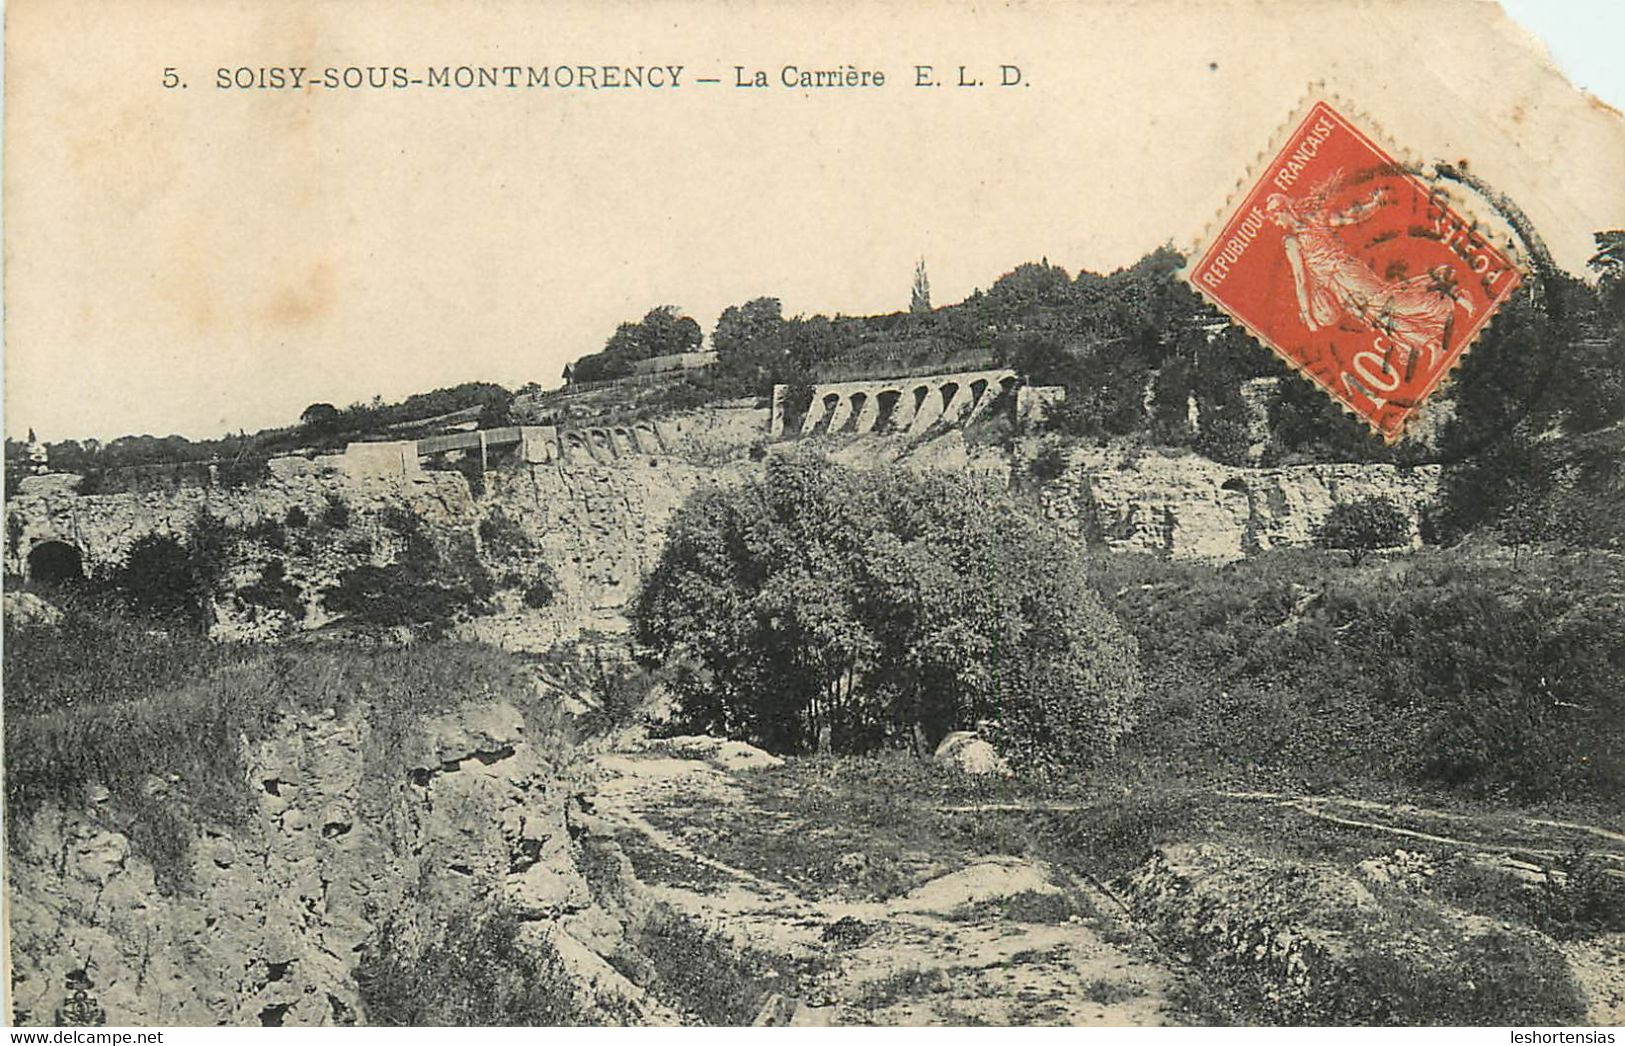 SOISY SOUS MONTMORENCY CARRIERE - Soisy-sous-Montmorency